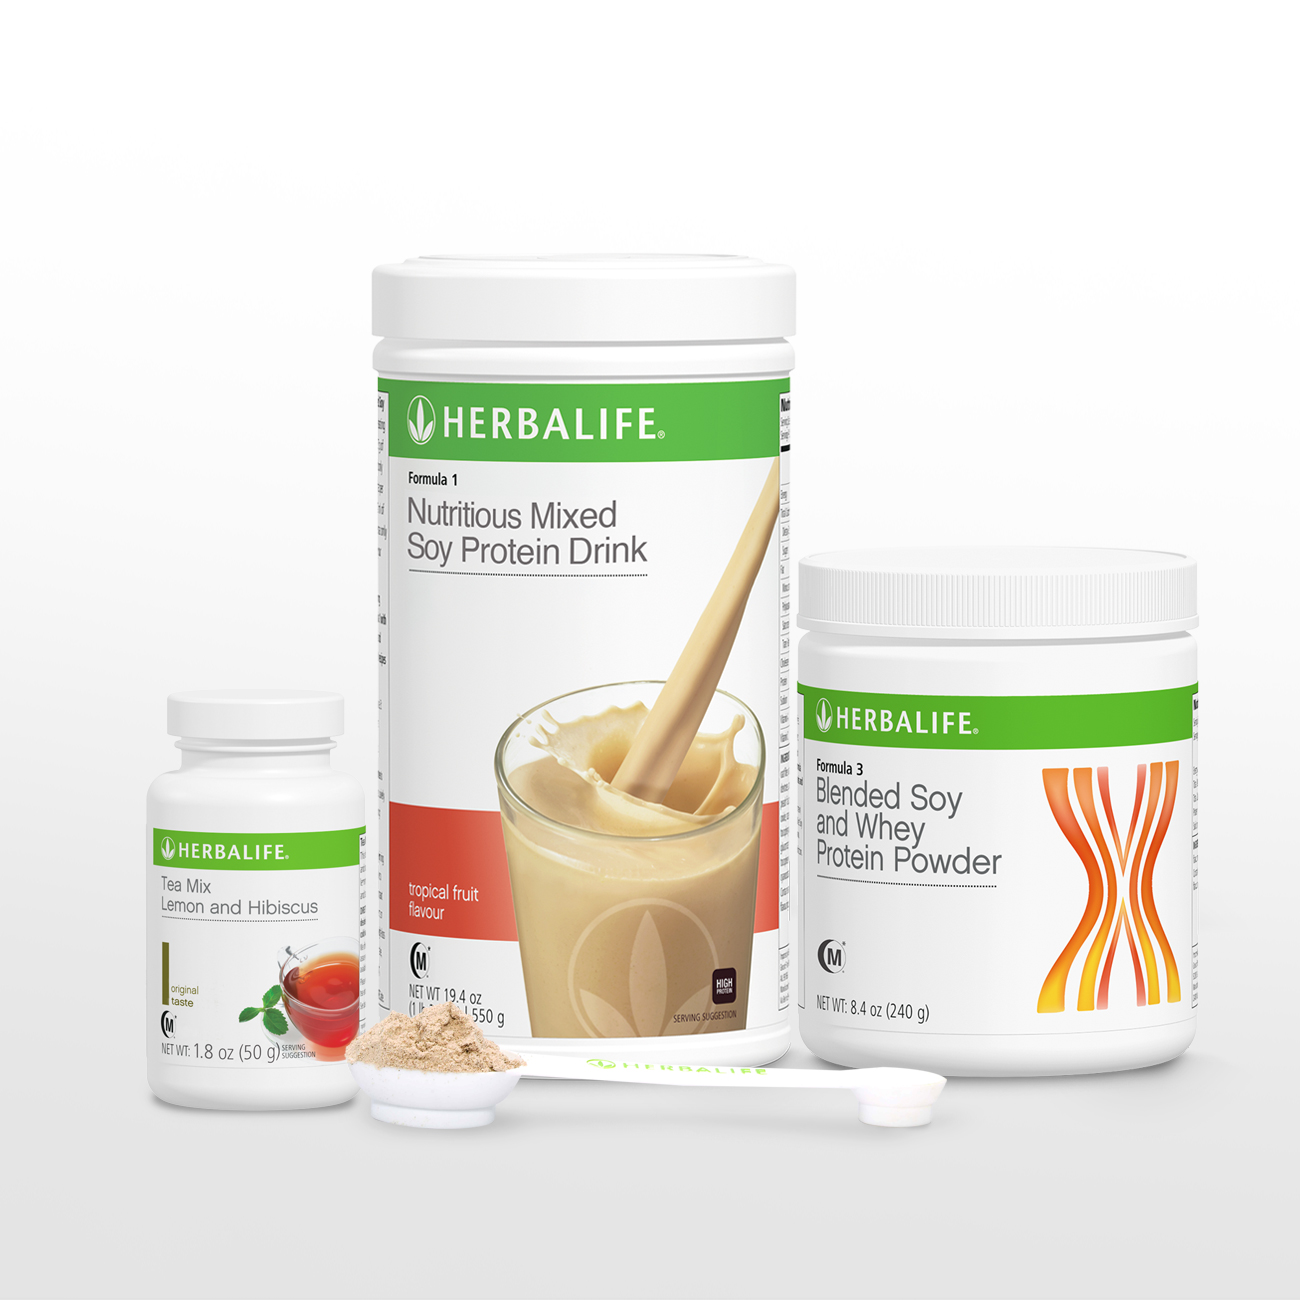 4282 Healthy Weight Management Start Now Pack F1(Flavors)/ F3 Protein Powder/Teamix(LH 50g) Tropical Fruit